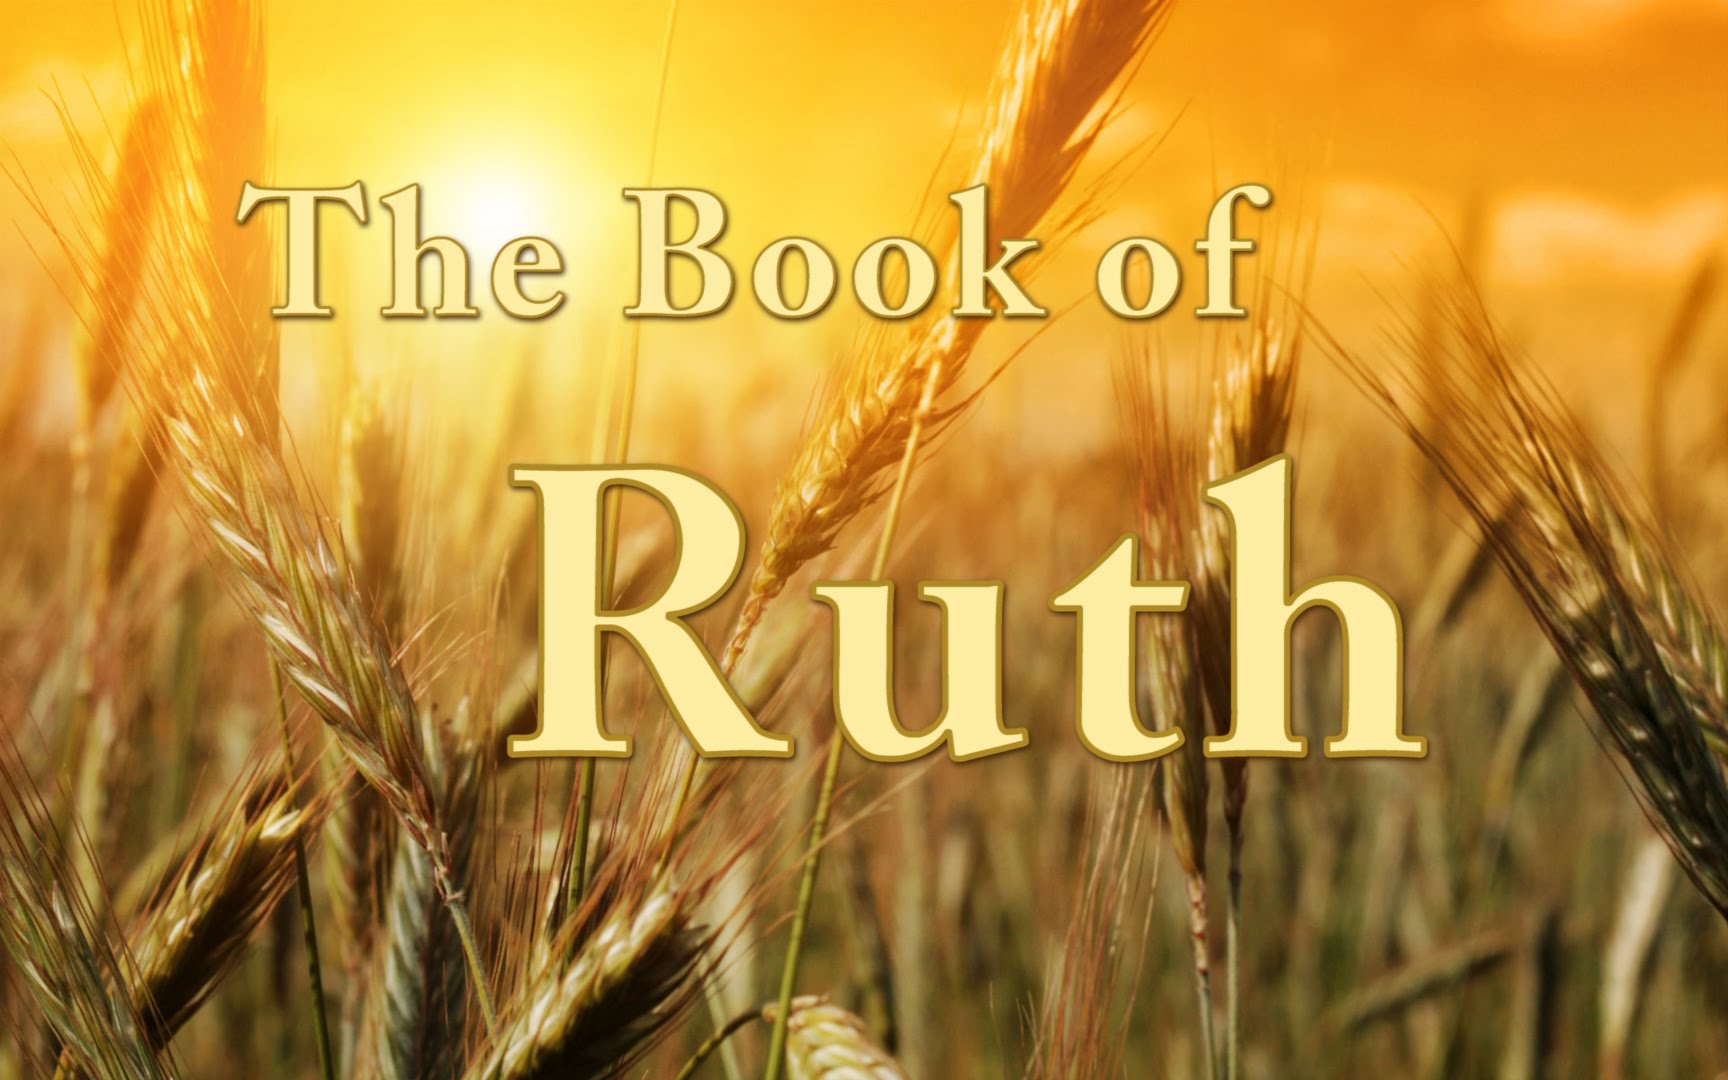 Introduction to the Story of Ruth